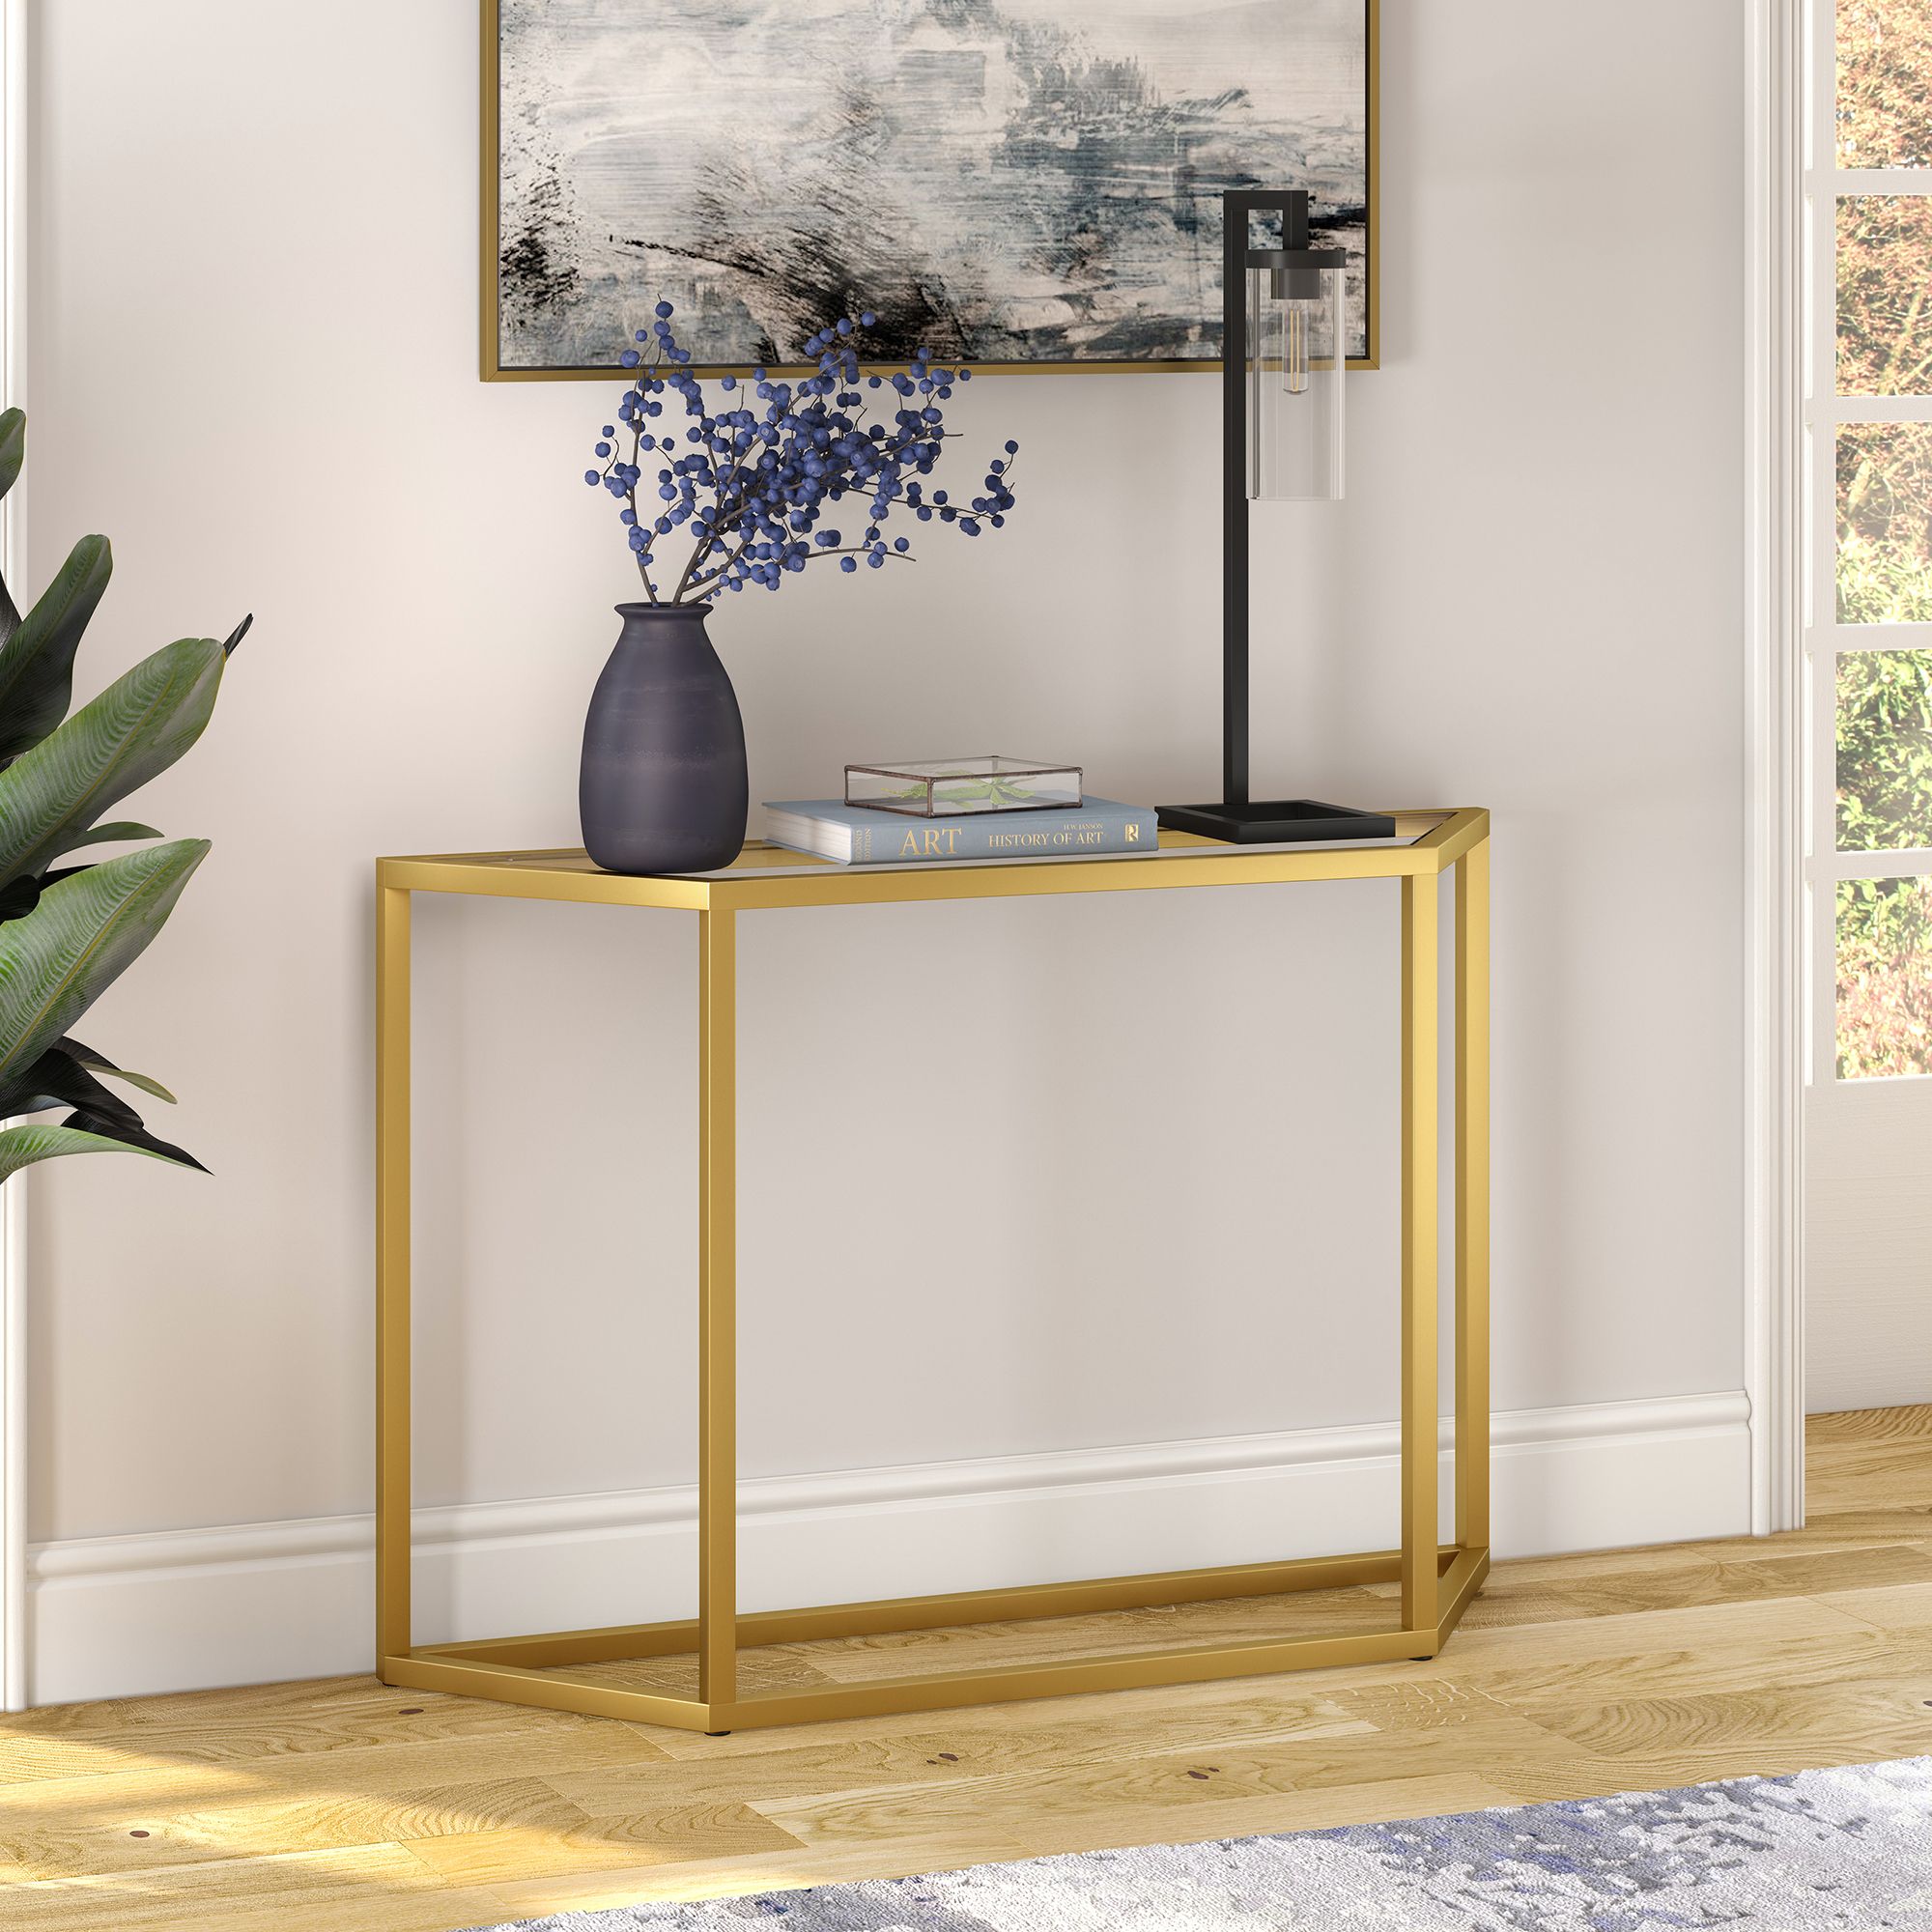 Evelyn&zoe Modern Console Table With Glass Top And Shelf – Walmart Within Metallic Gold Modern Console Tables (View 3 of 20)